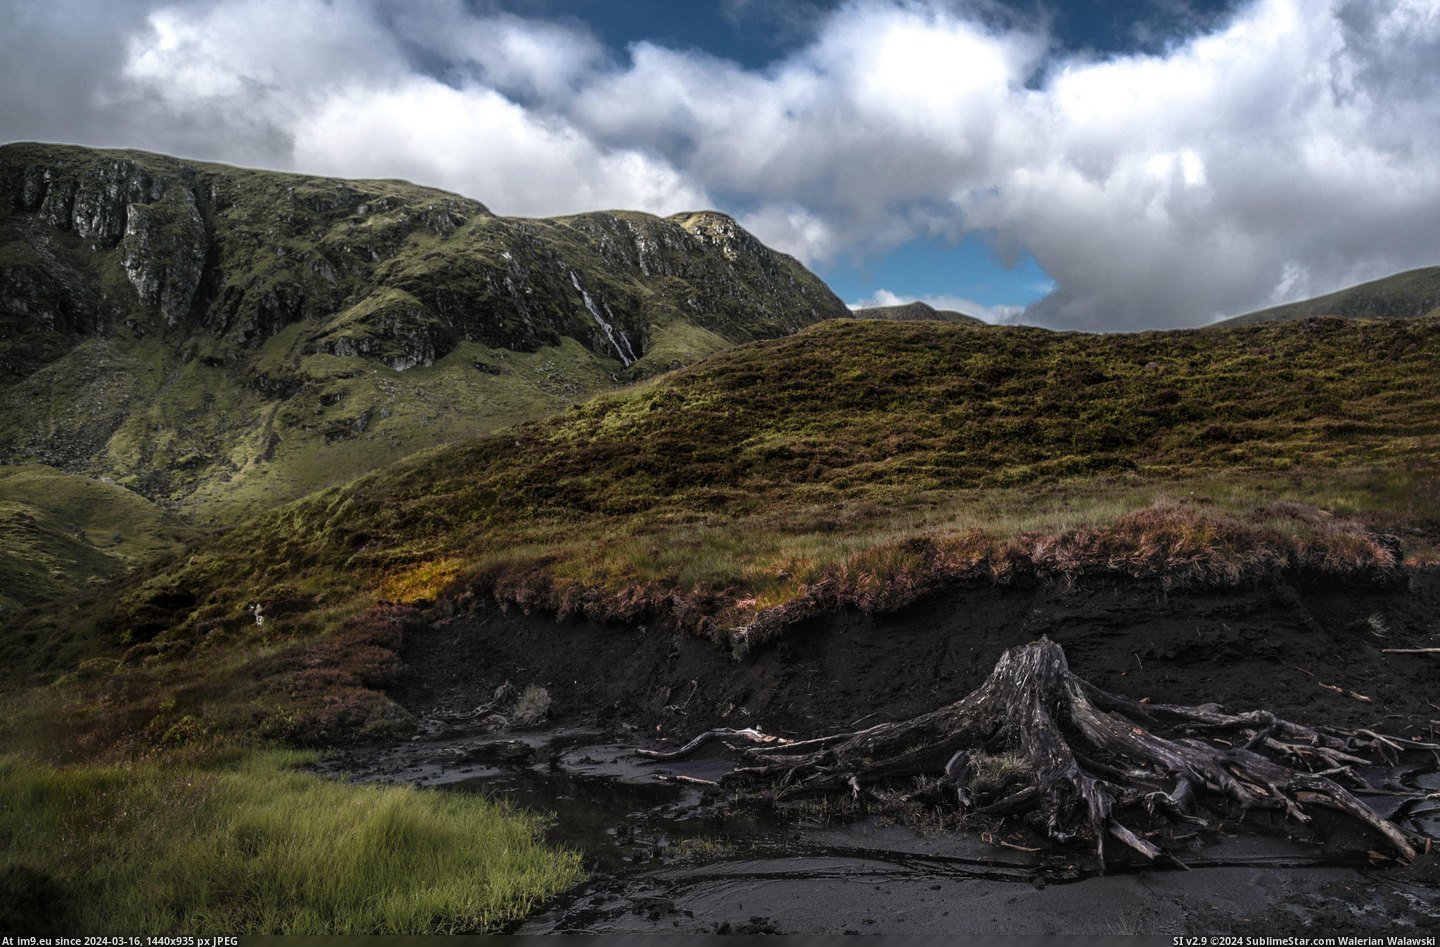 #Tree #Walking #Highlands #Stumbled #Root #Fitting [Earthporn] Walking up the highlands in my Kilt I stumbled upon a tree root which I though would be very fitting on Earthporn -  Pic. (Image of album My r/EARTHPORN favs))